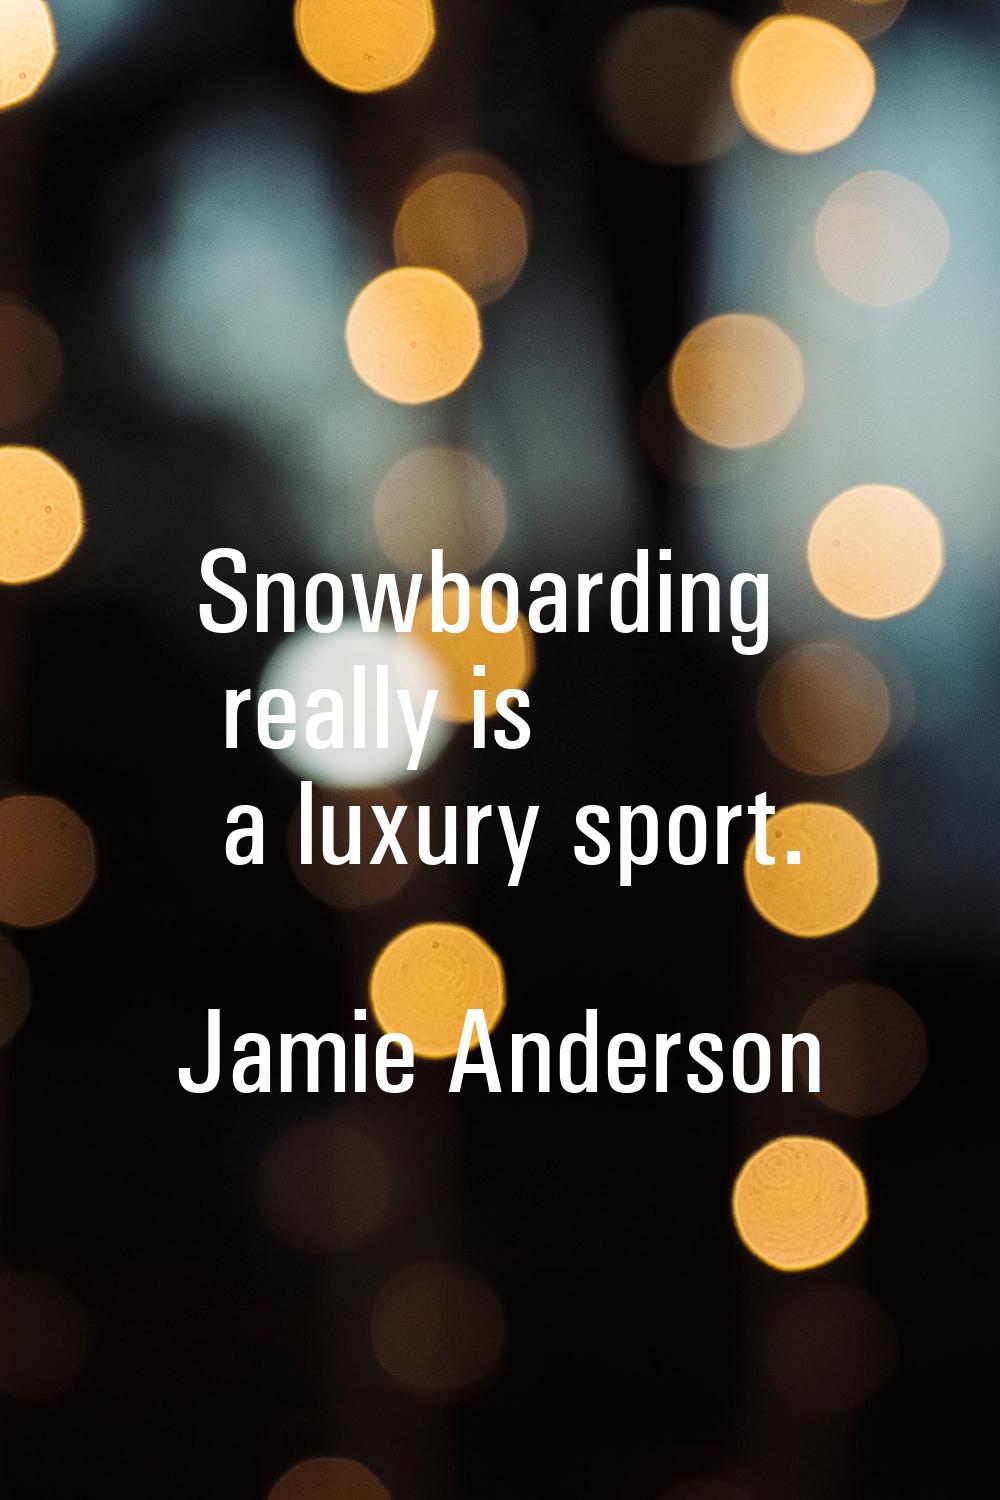 Snowboarding really is a luxury sport.